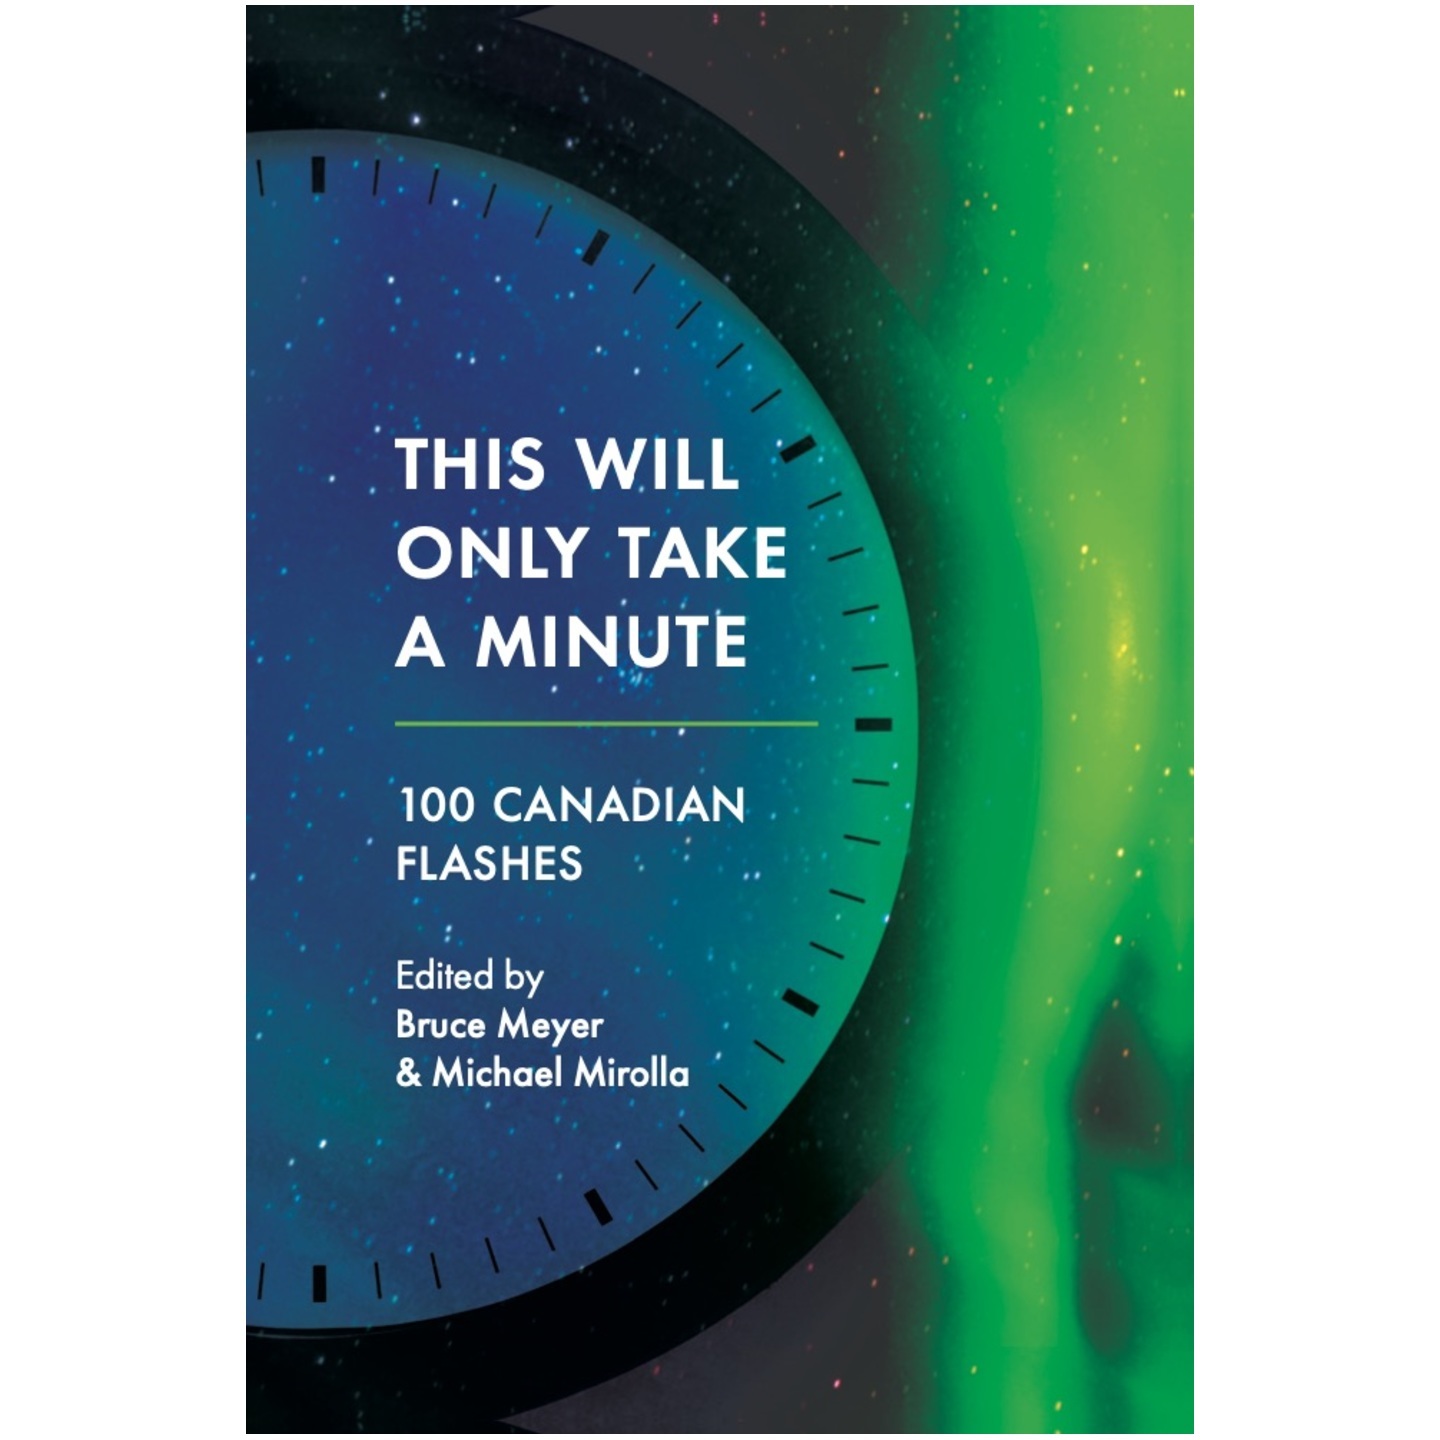 This Will Only Take A Minute: 100 Canadian Flashes (Edited by Bruce Meyer & Michael Mirolla)